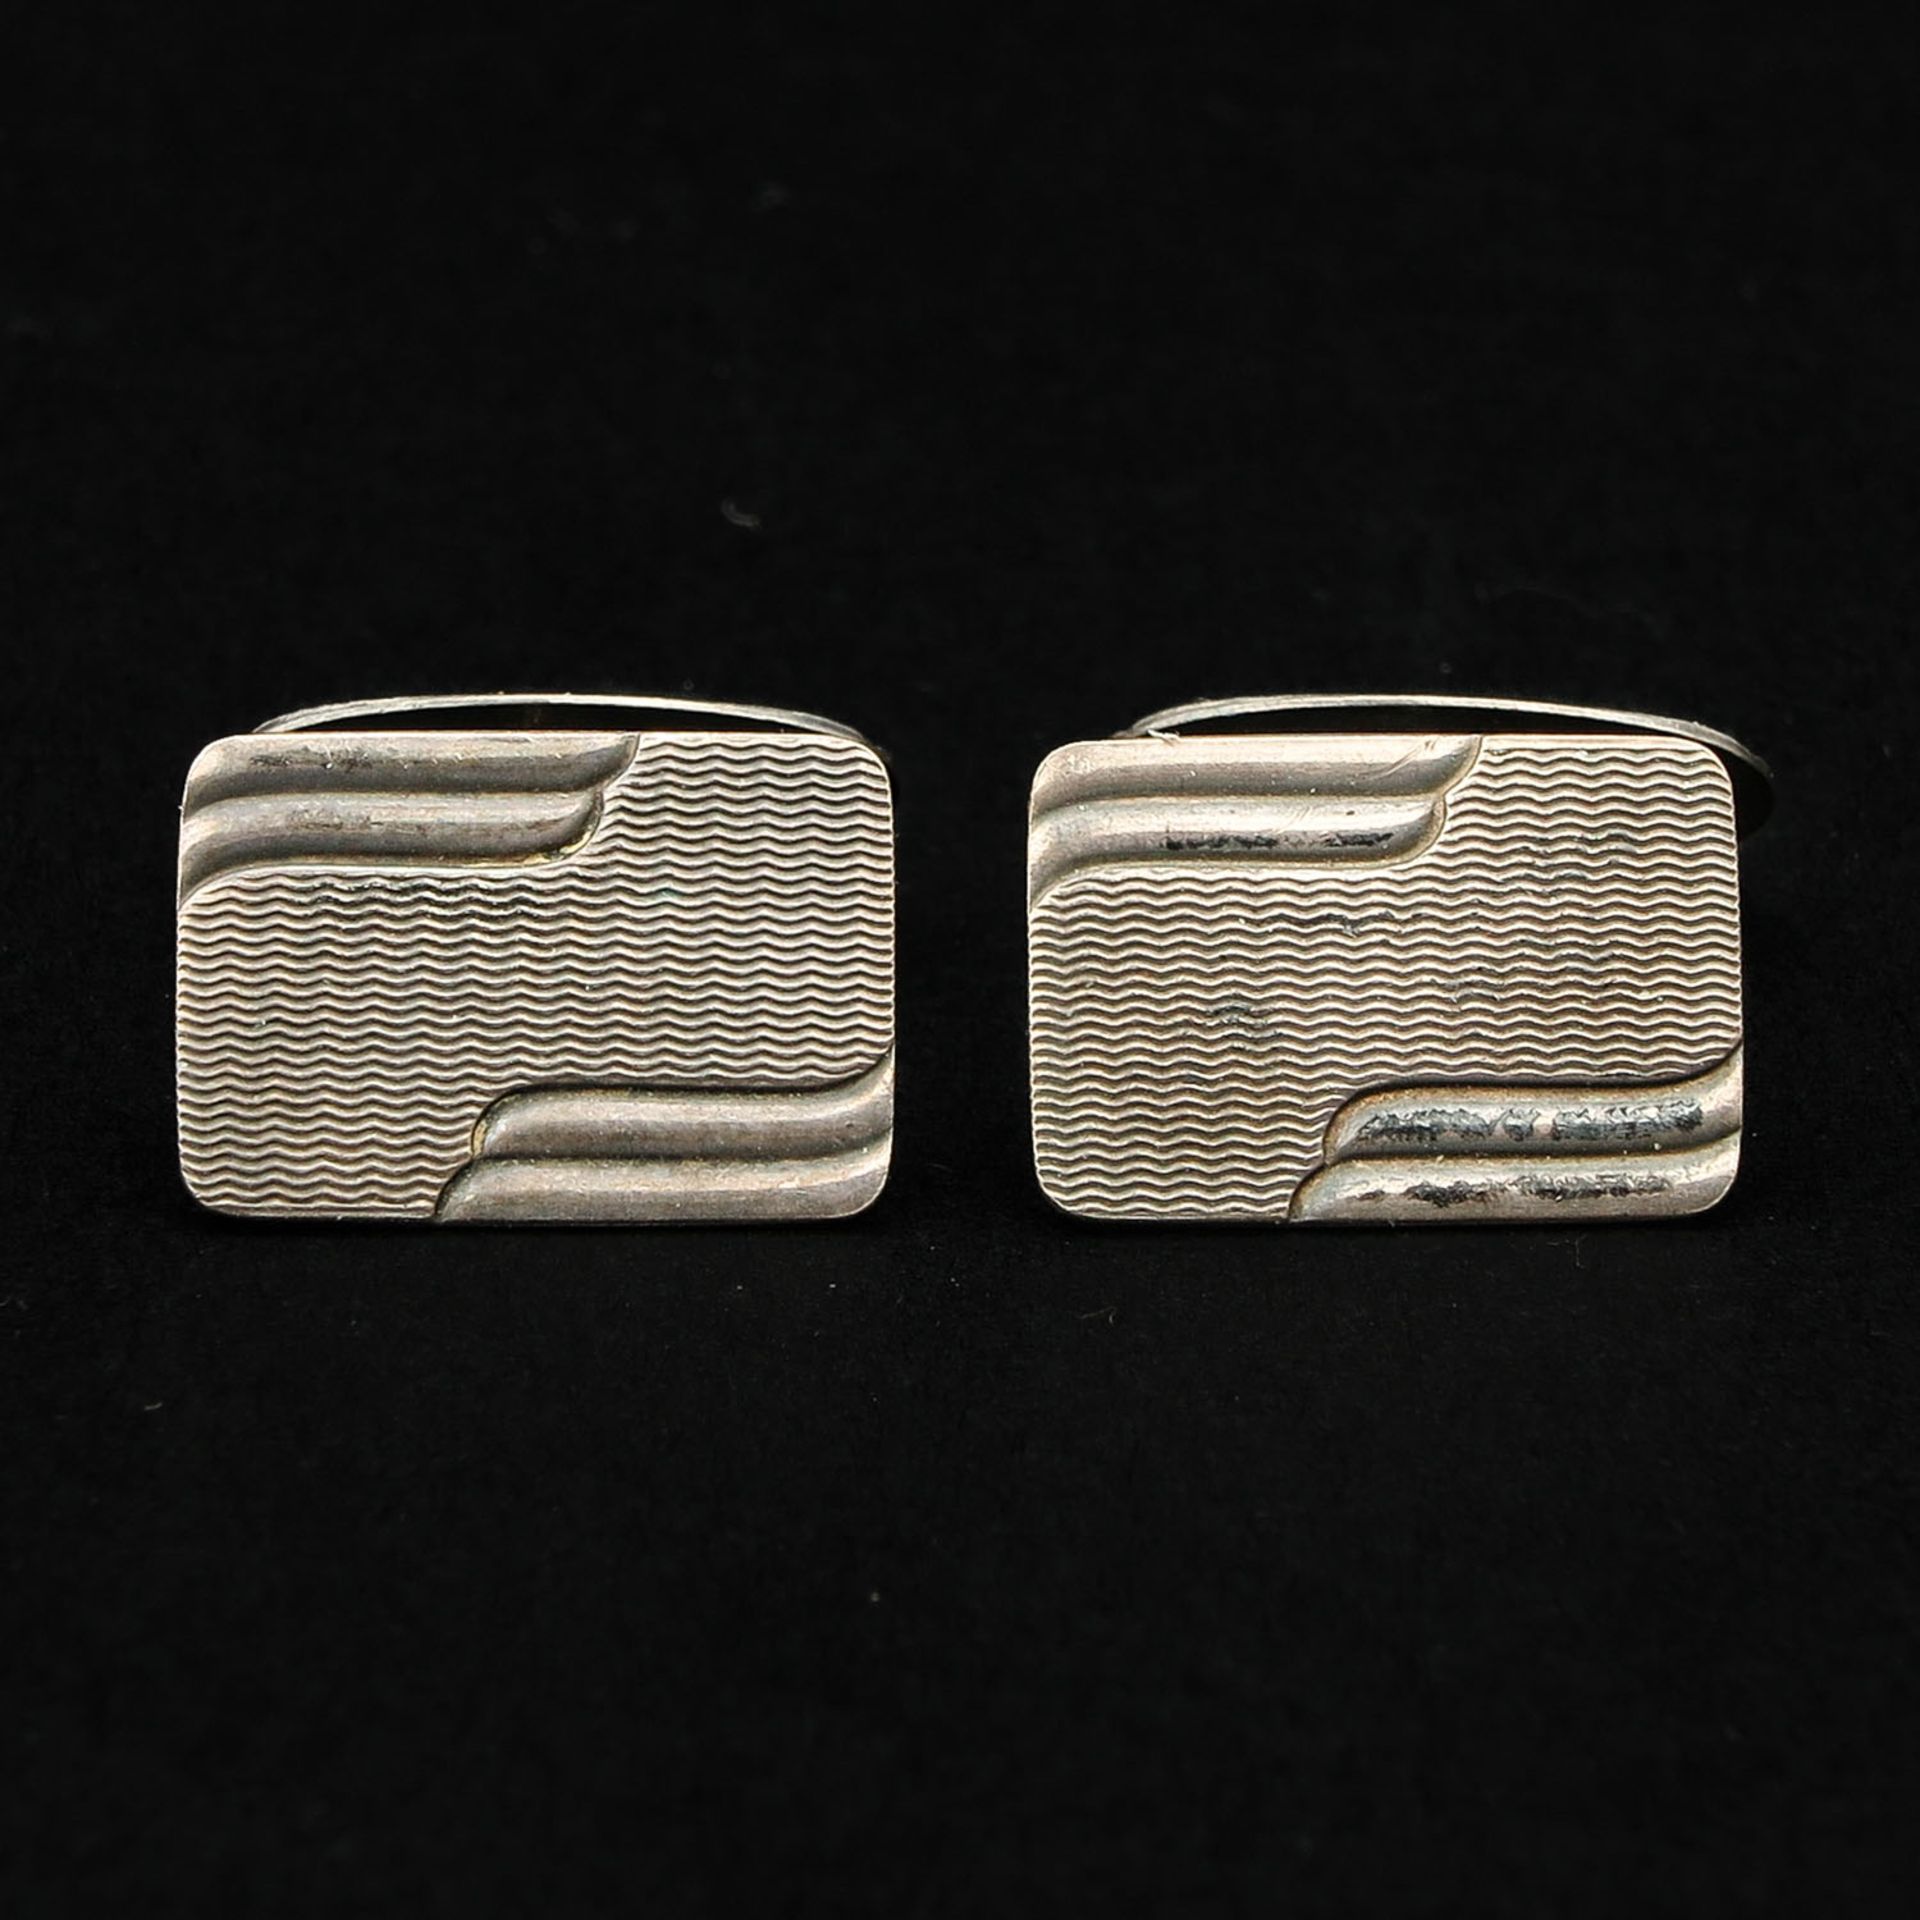 A Collection of Cuff Links - Image 6 of 9